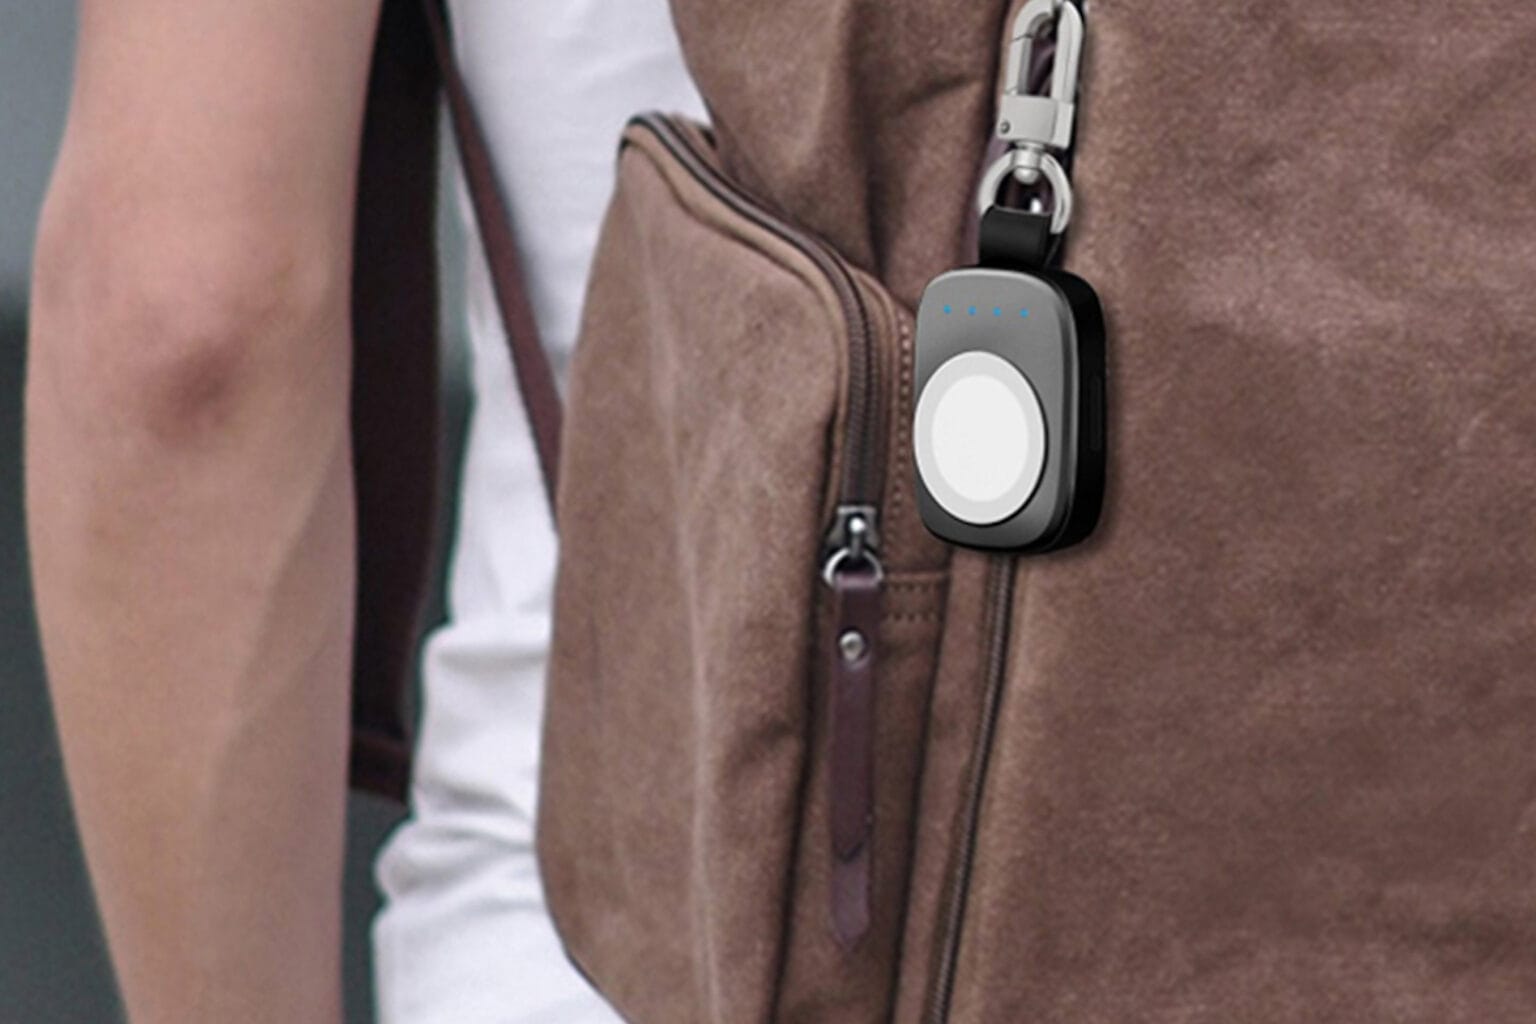 Wirelessly charge your Apple Watch with this handy keychain